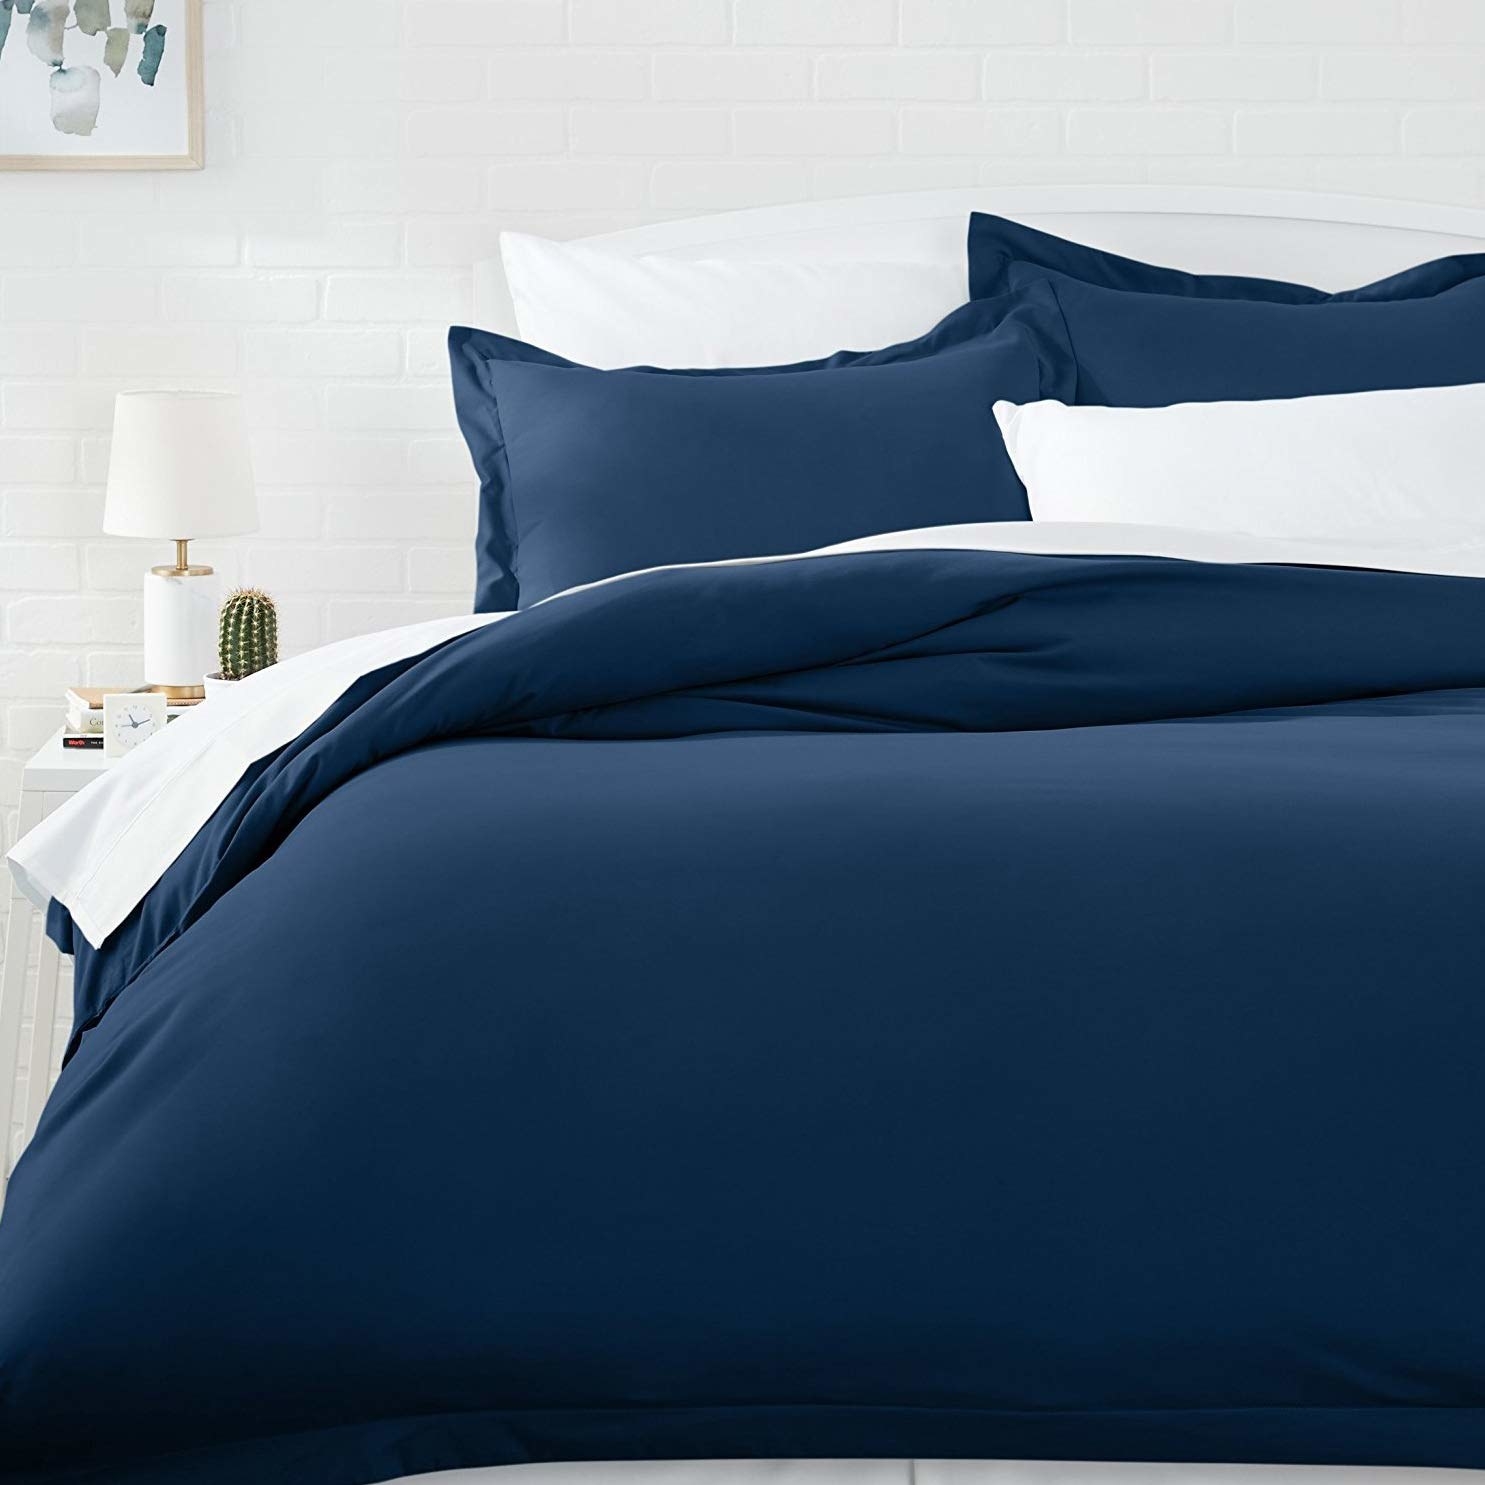 A blue duvet cover on a bed beside a bedside table 